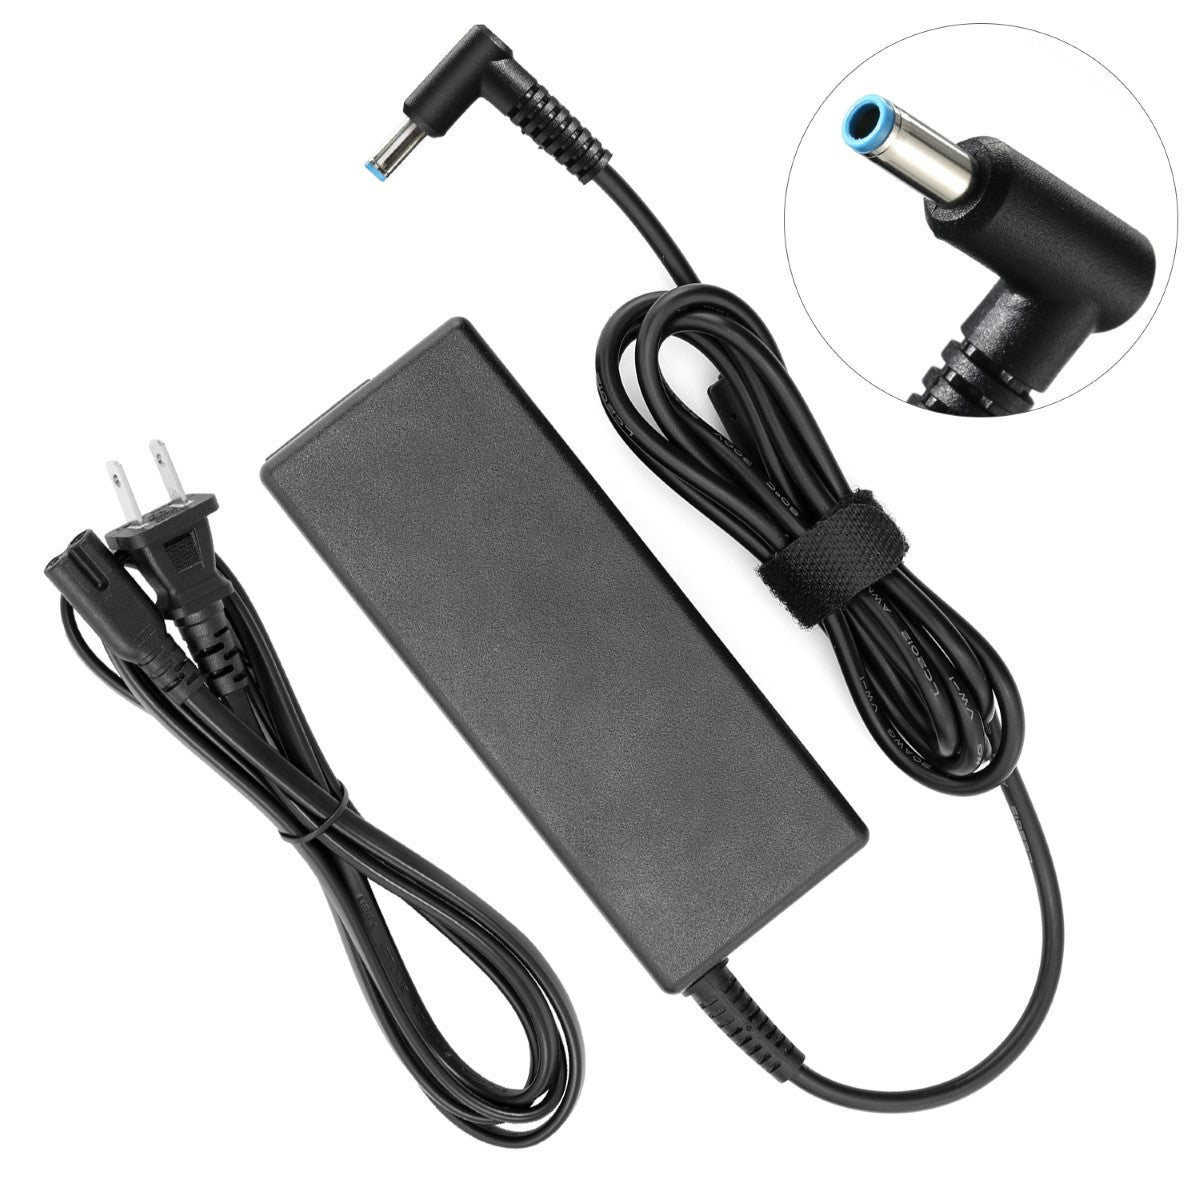 AC Adapter Charger for HP ProBook 455 G3 Notebook.